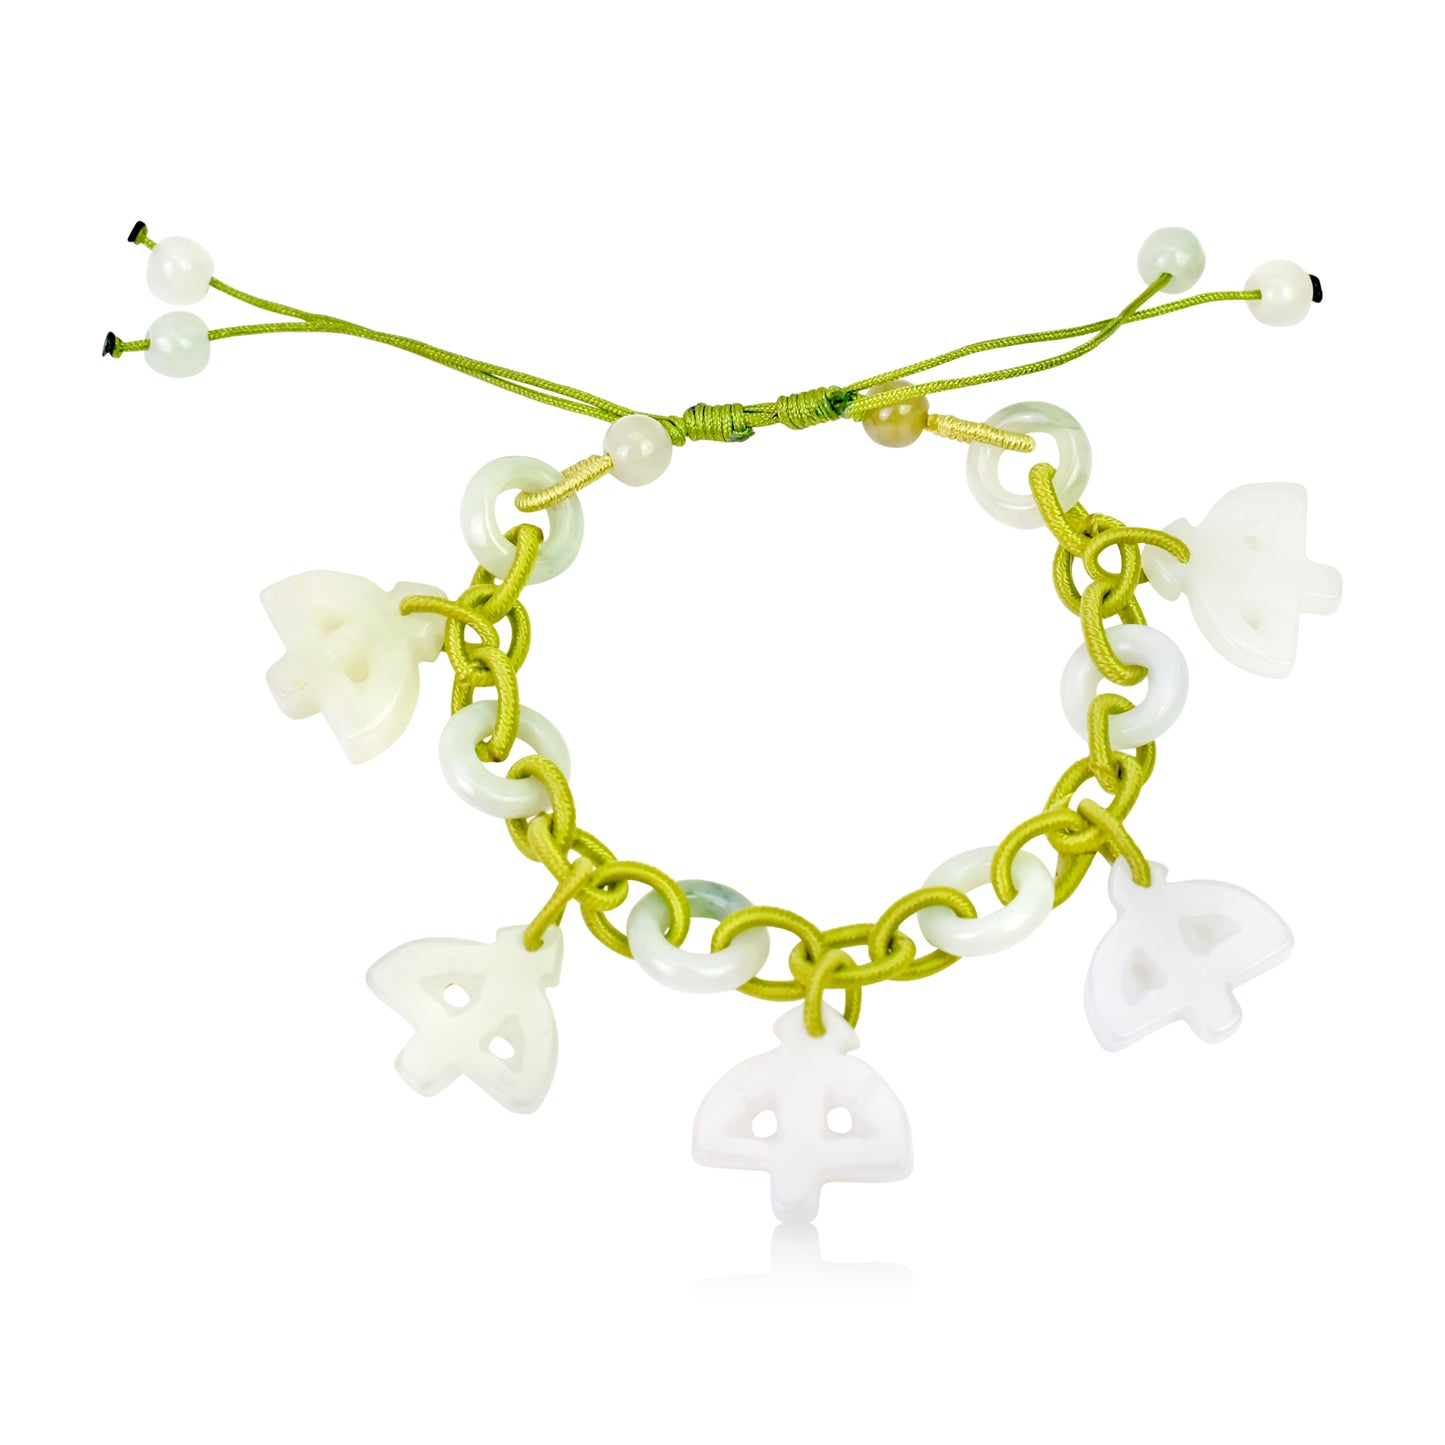 Celebrate your Zodiac Sign with Sagittarius Astrology Jade Bracelet made with Lime Cord